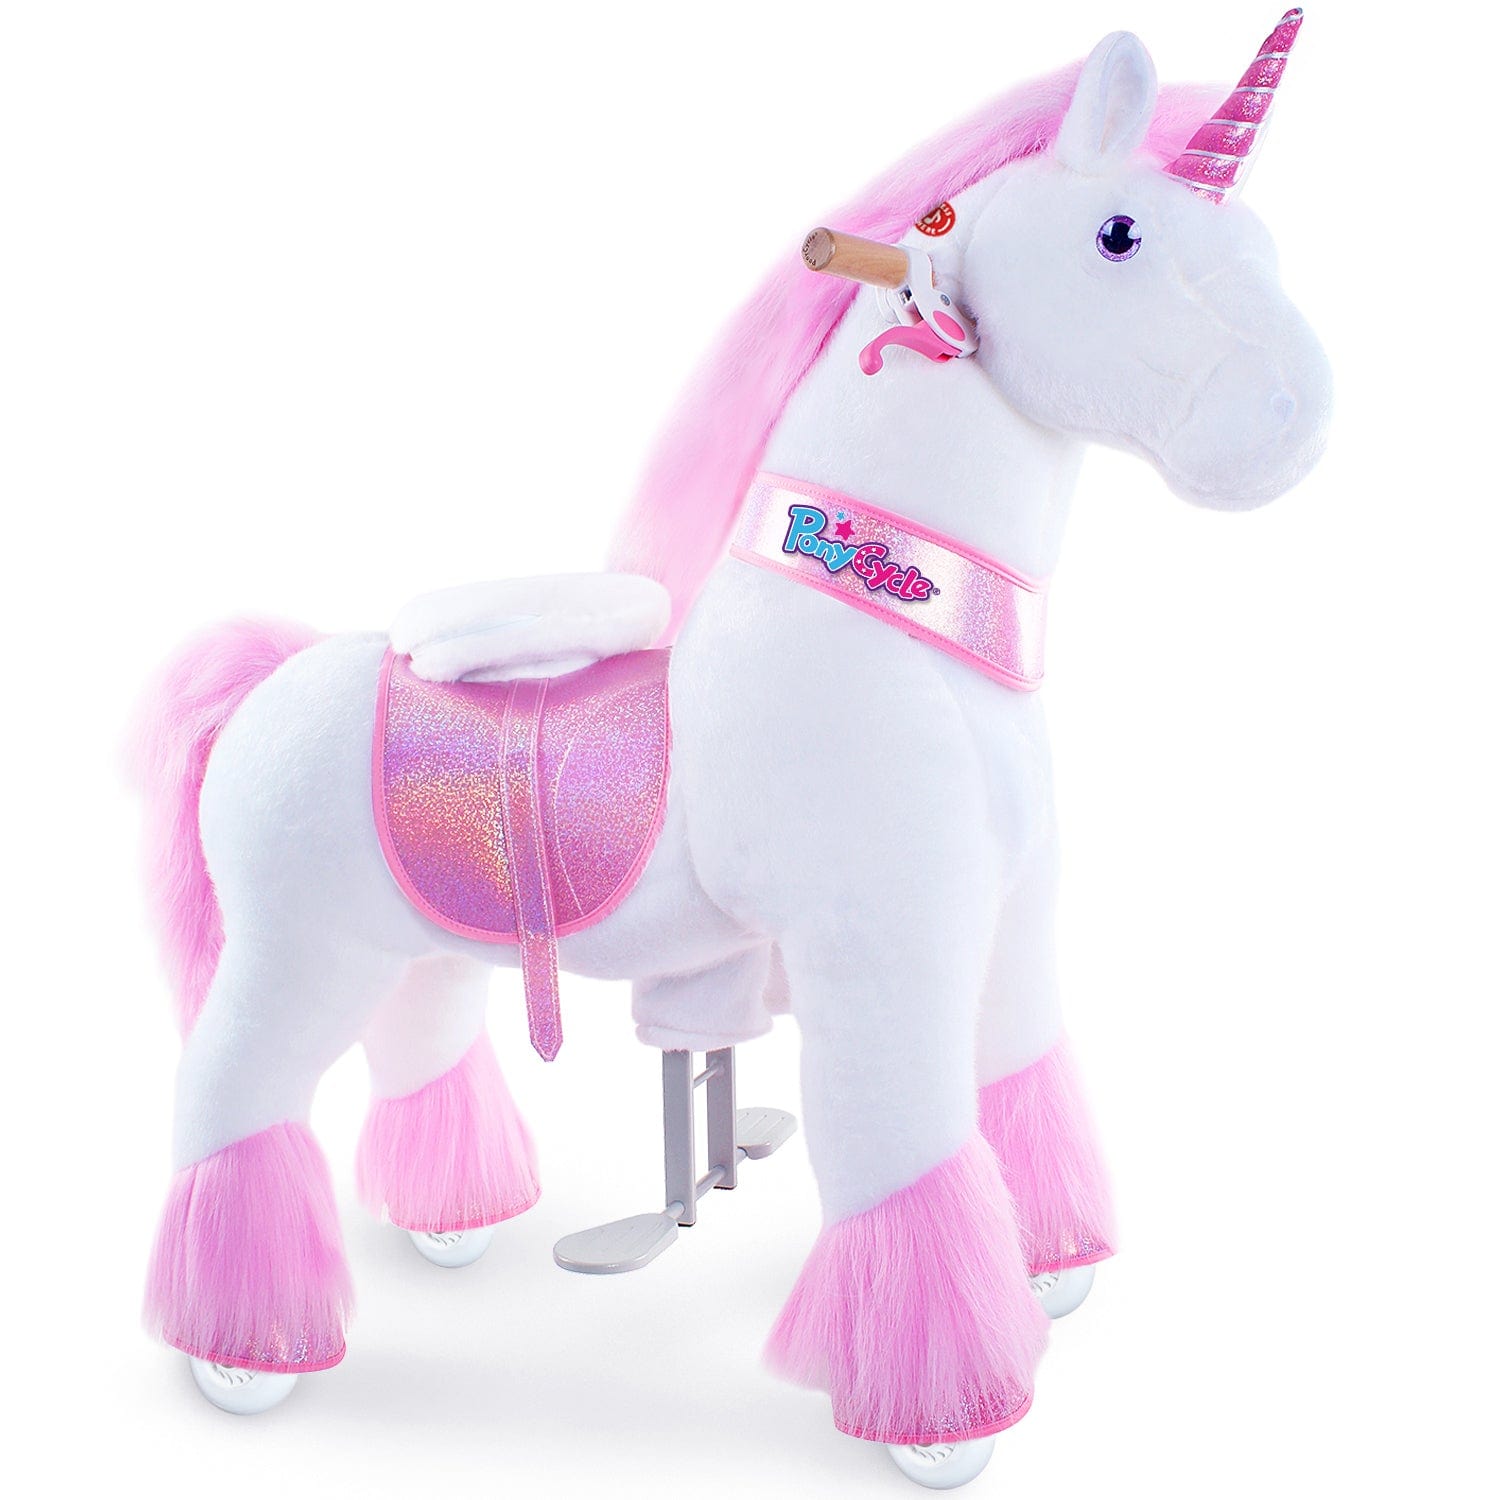 PonyCycle, Inc. ride on toy Pink / Size 4 for Age 4-8 Ride on Unicorn